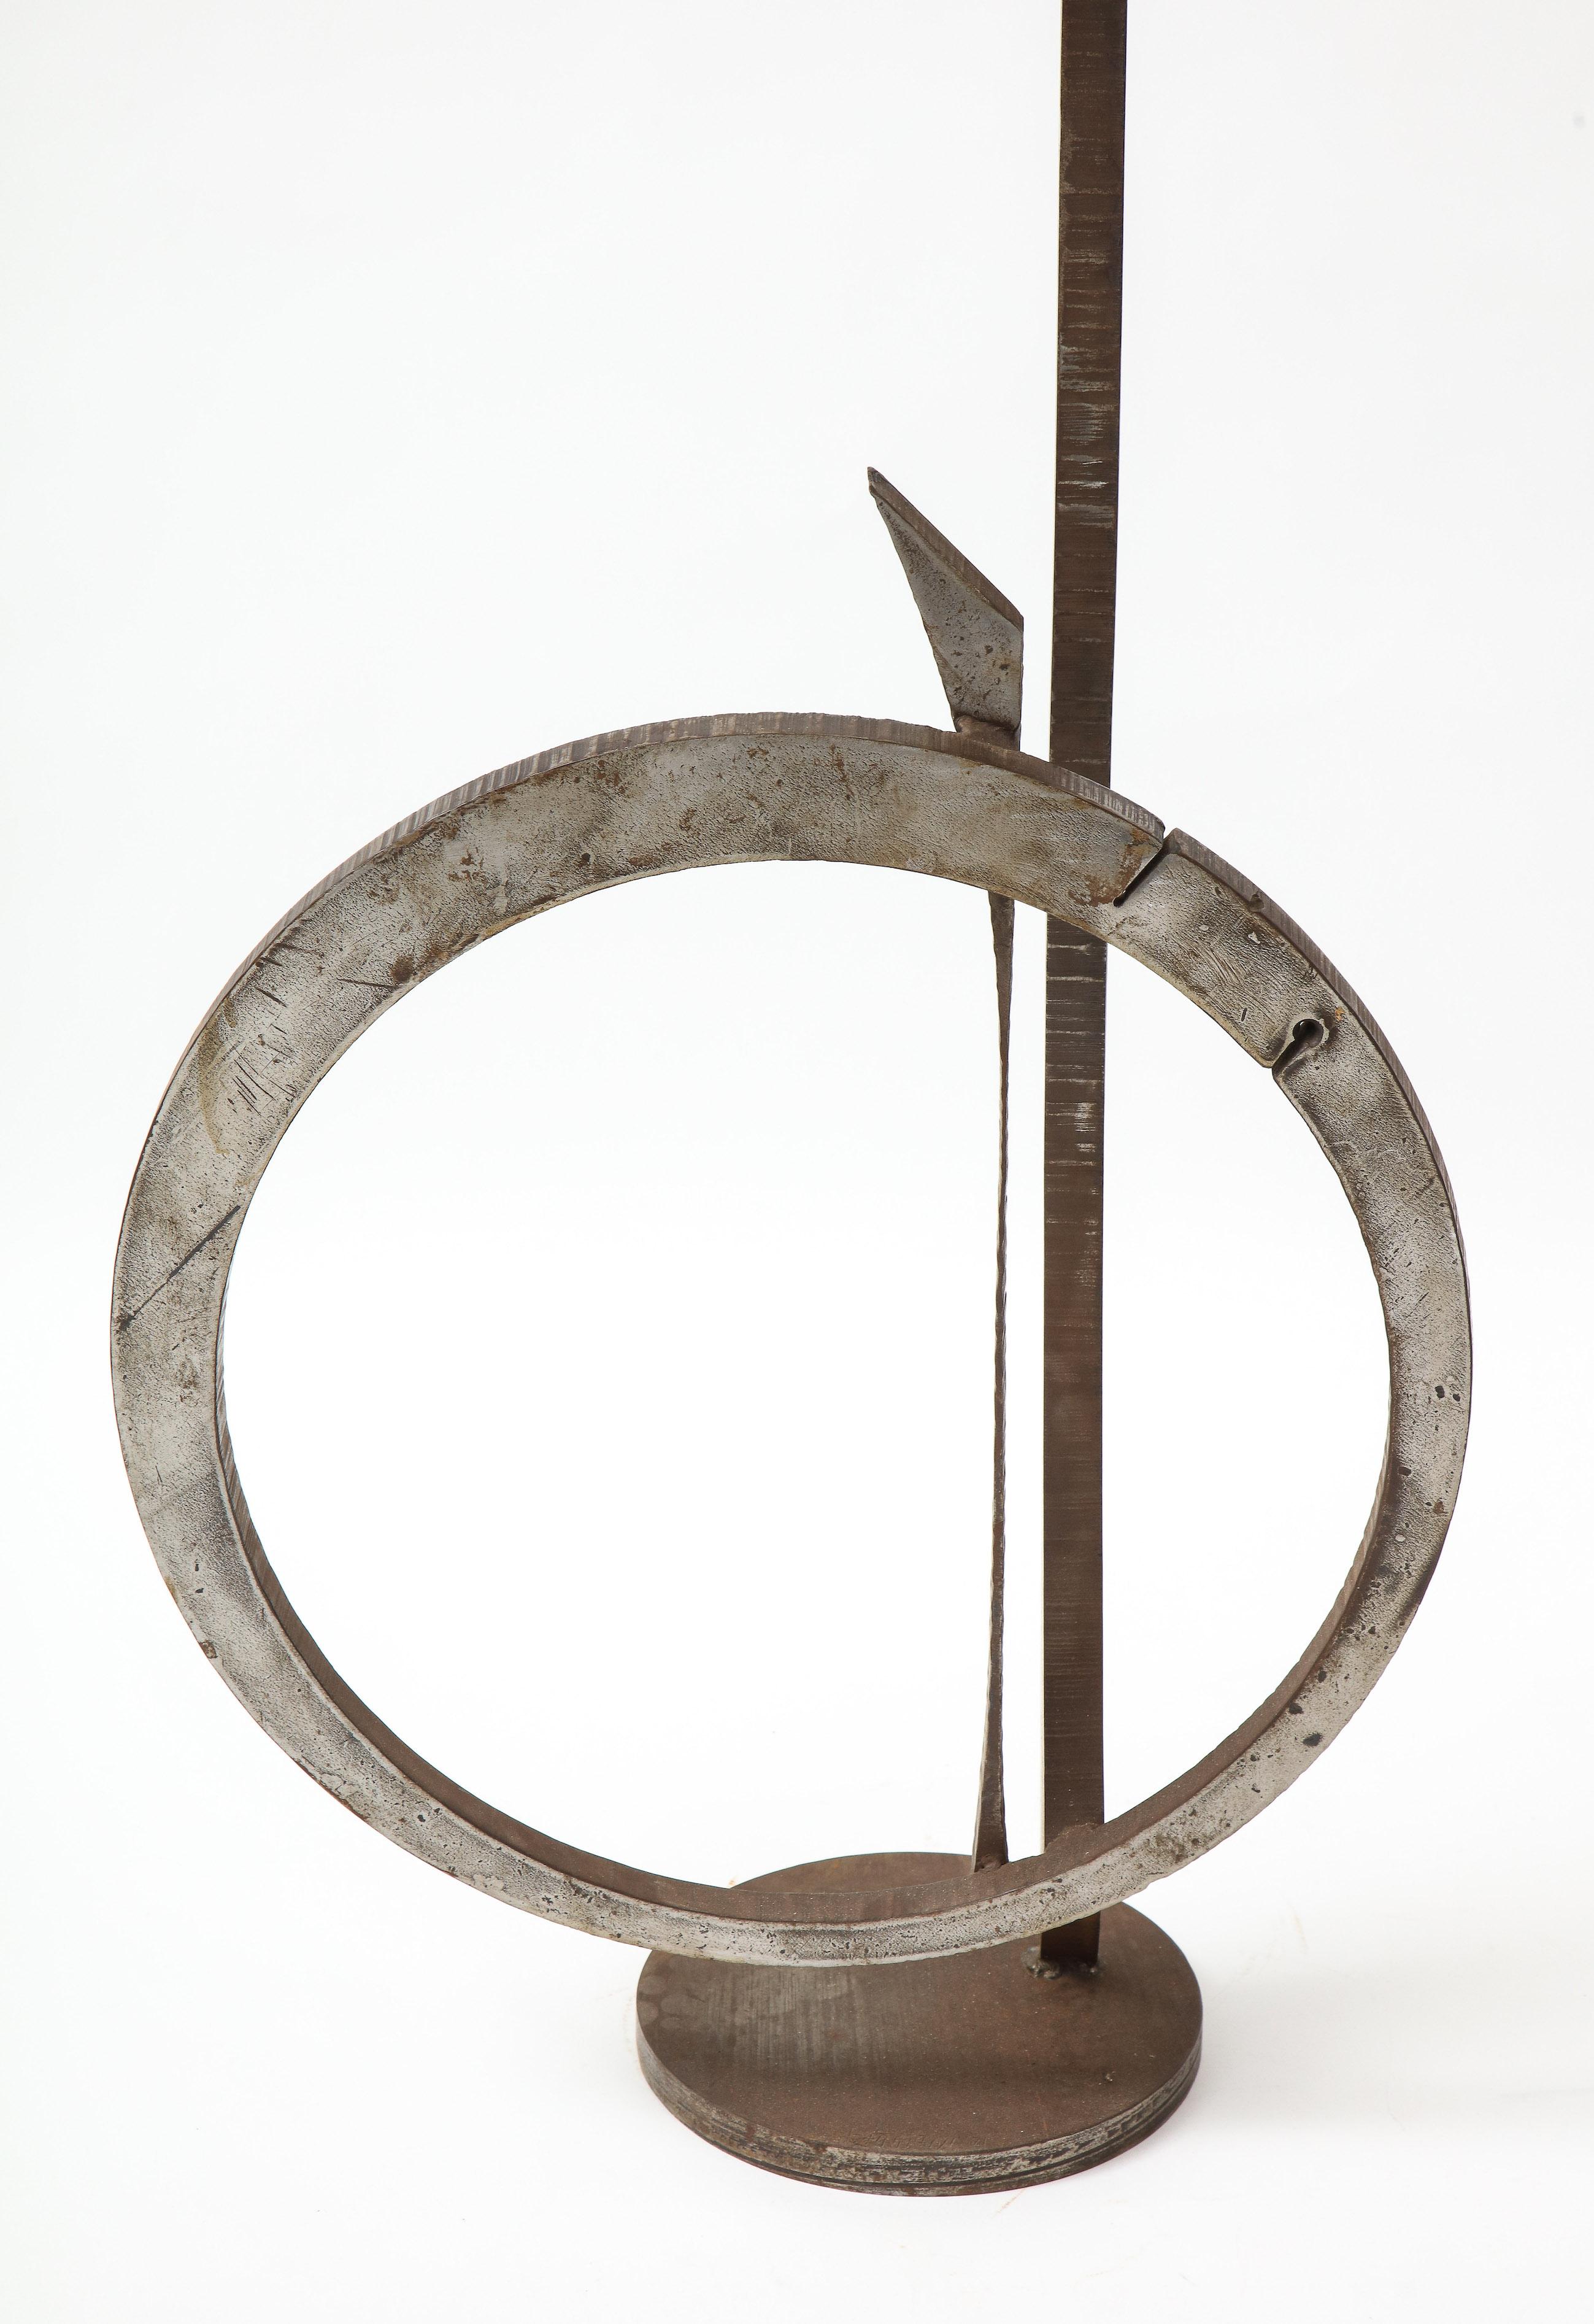 Wrought Iron Sculpture by Amilar Zannoni In Good Condition For Sale In Montreal, QC